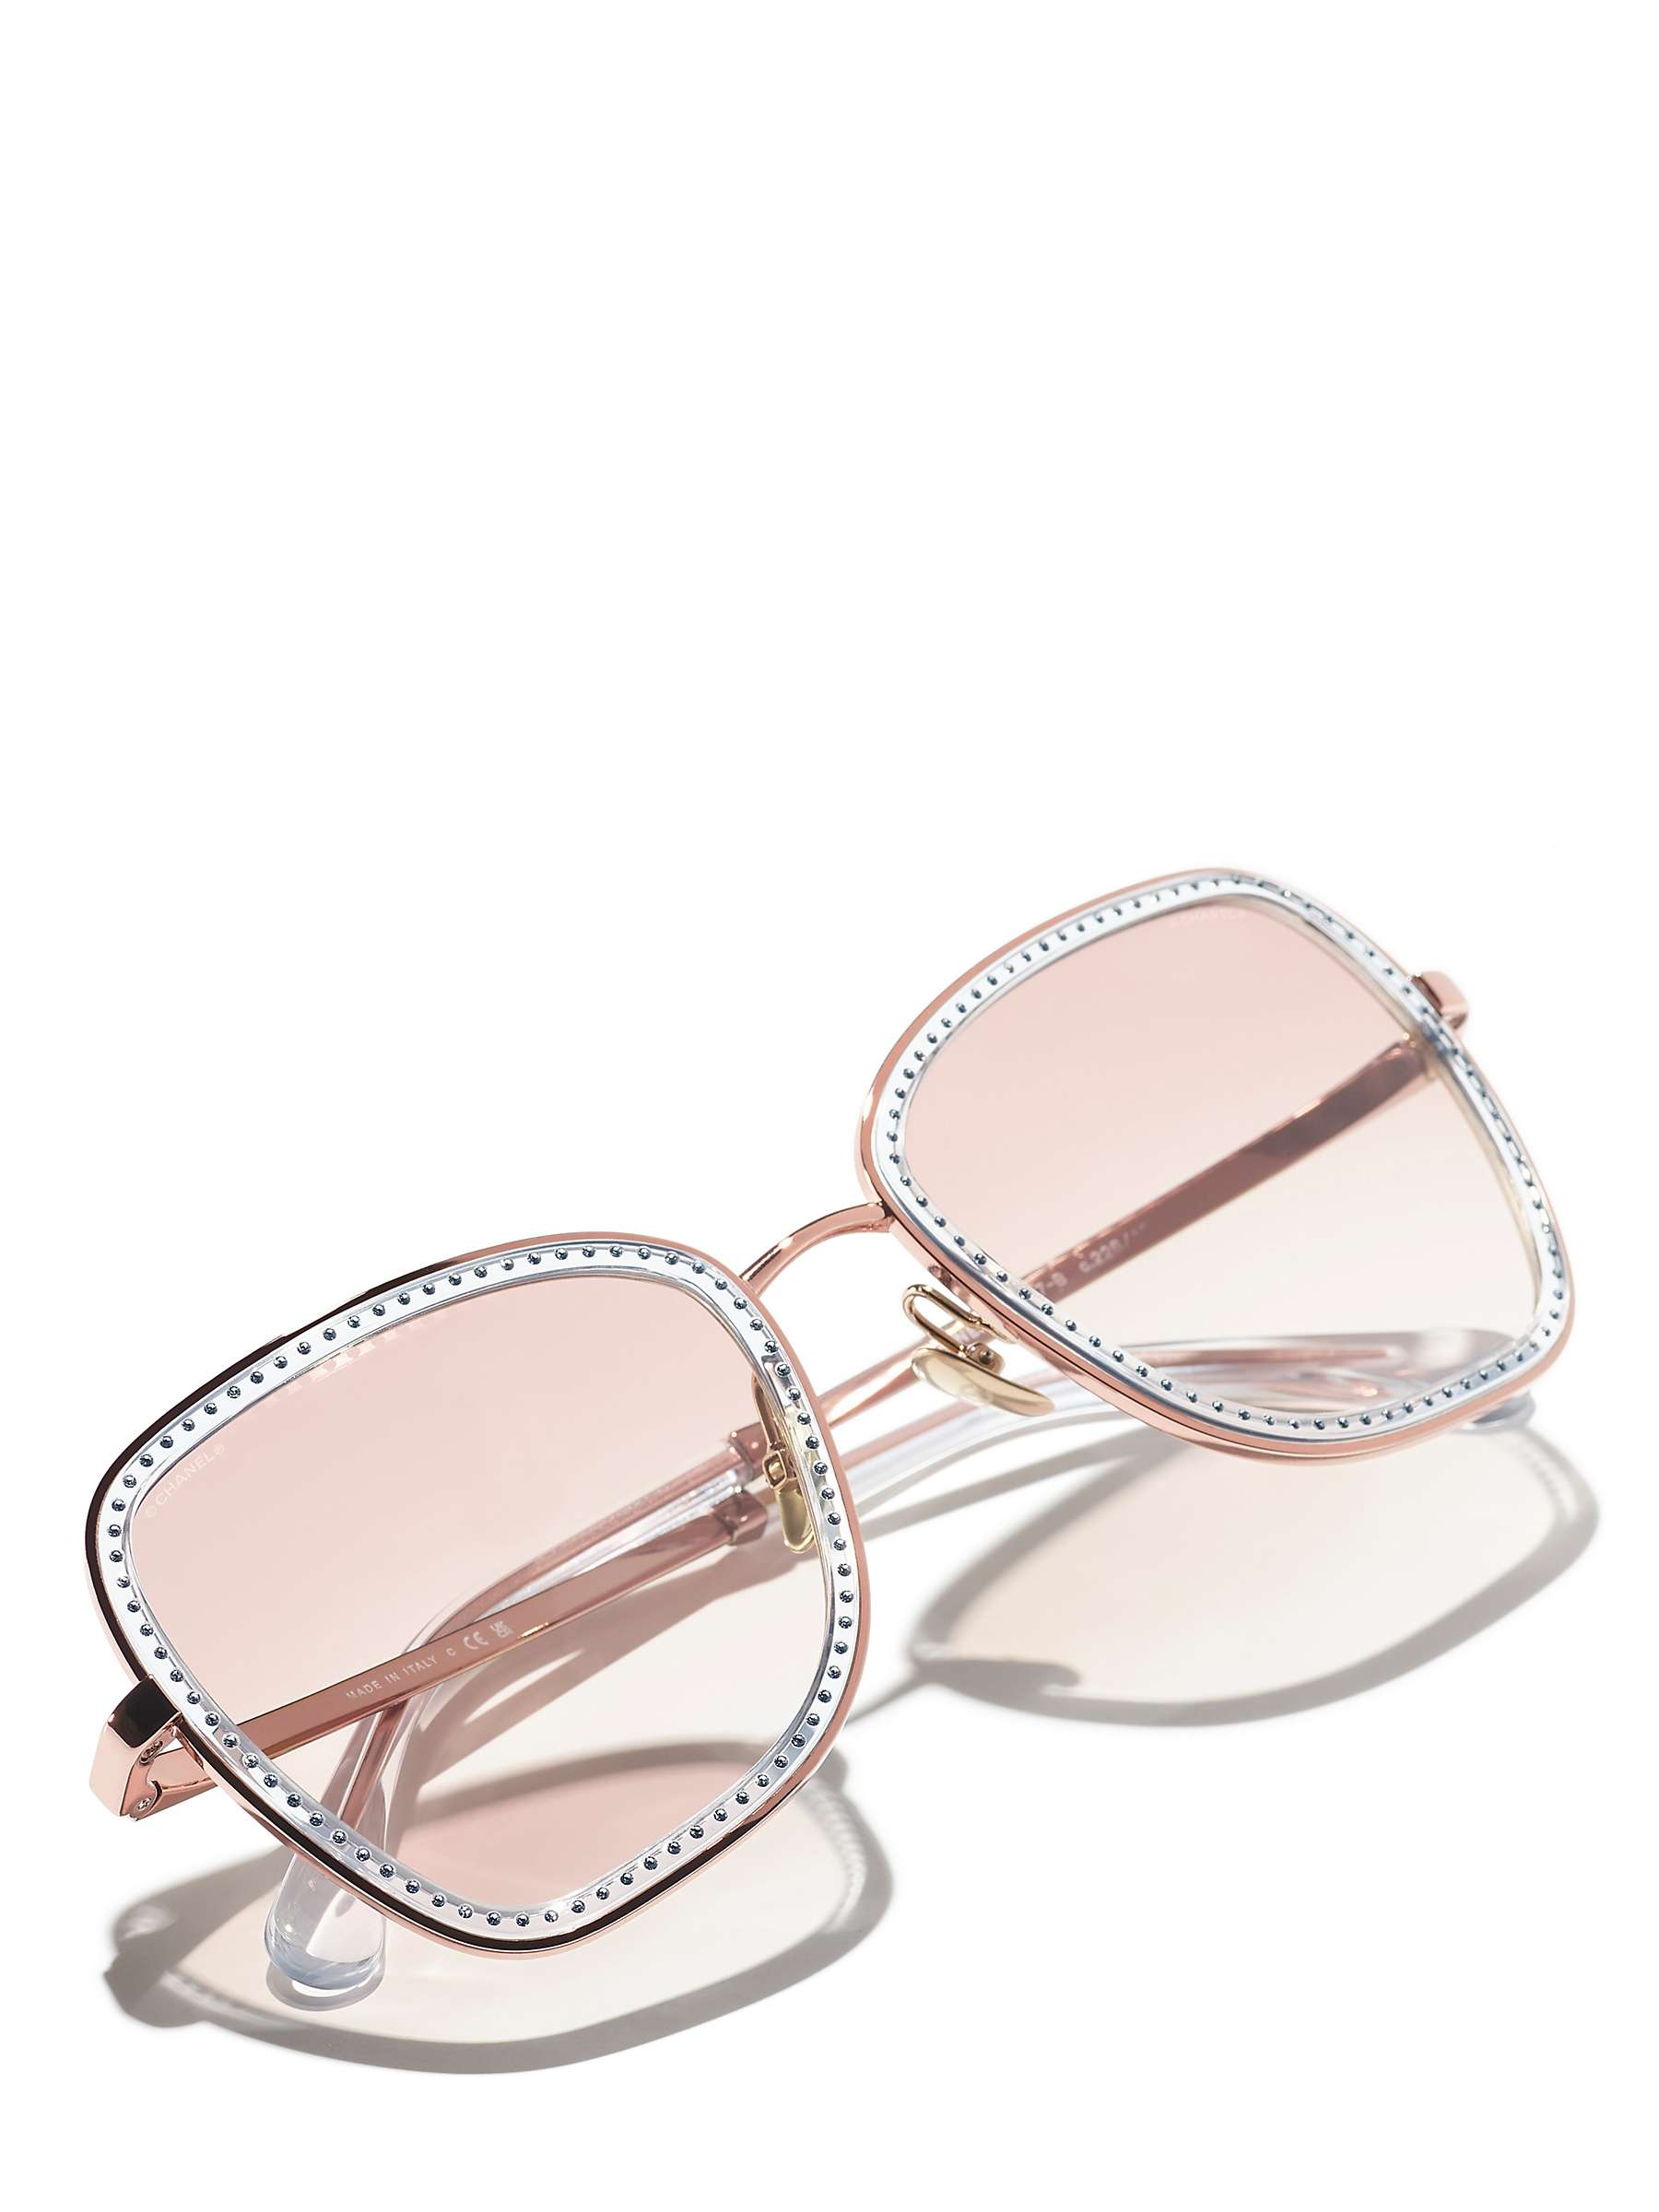 Buy CHANEL Square Sunglasses CH4277BC Bronze/Pink Gradient Online at johnlewis.com